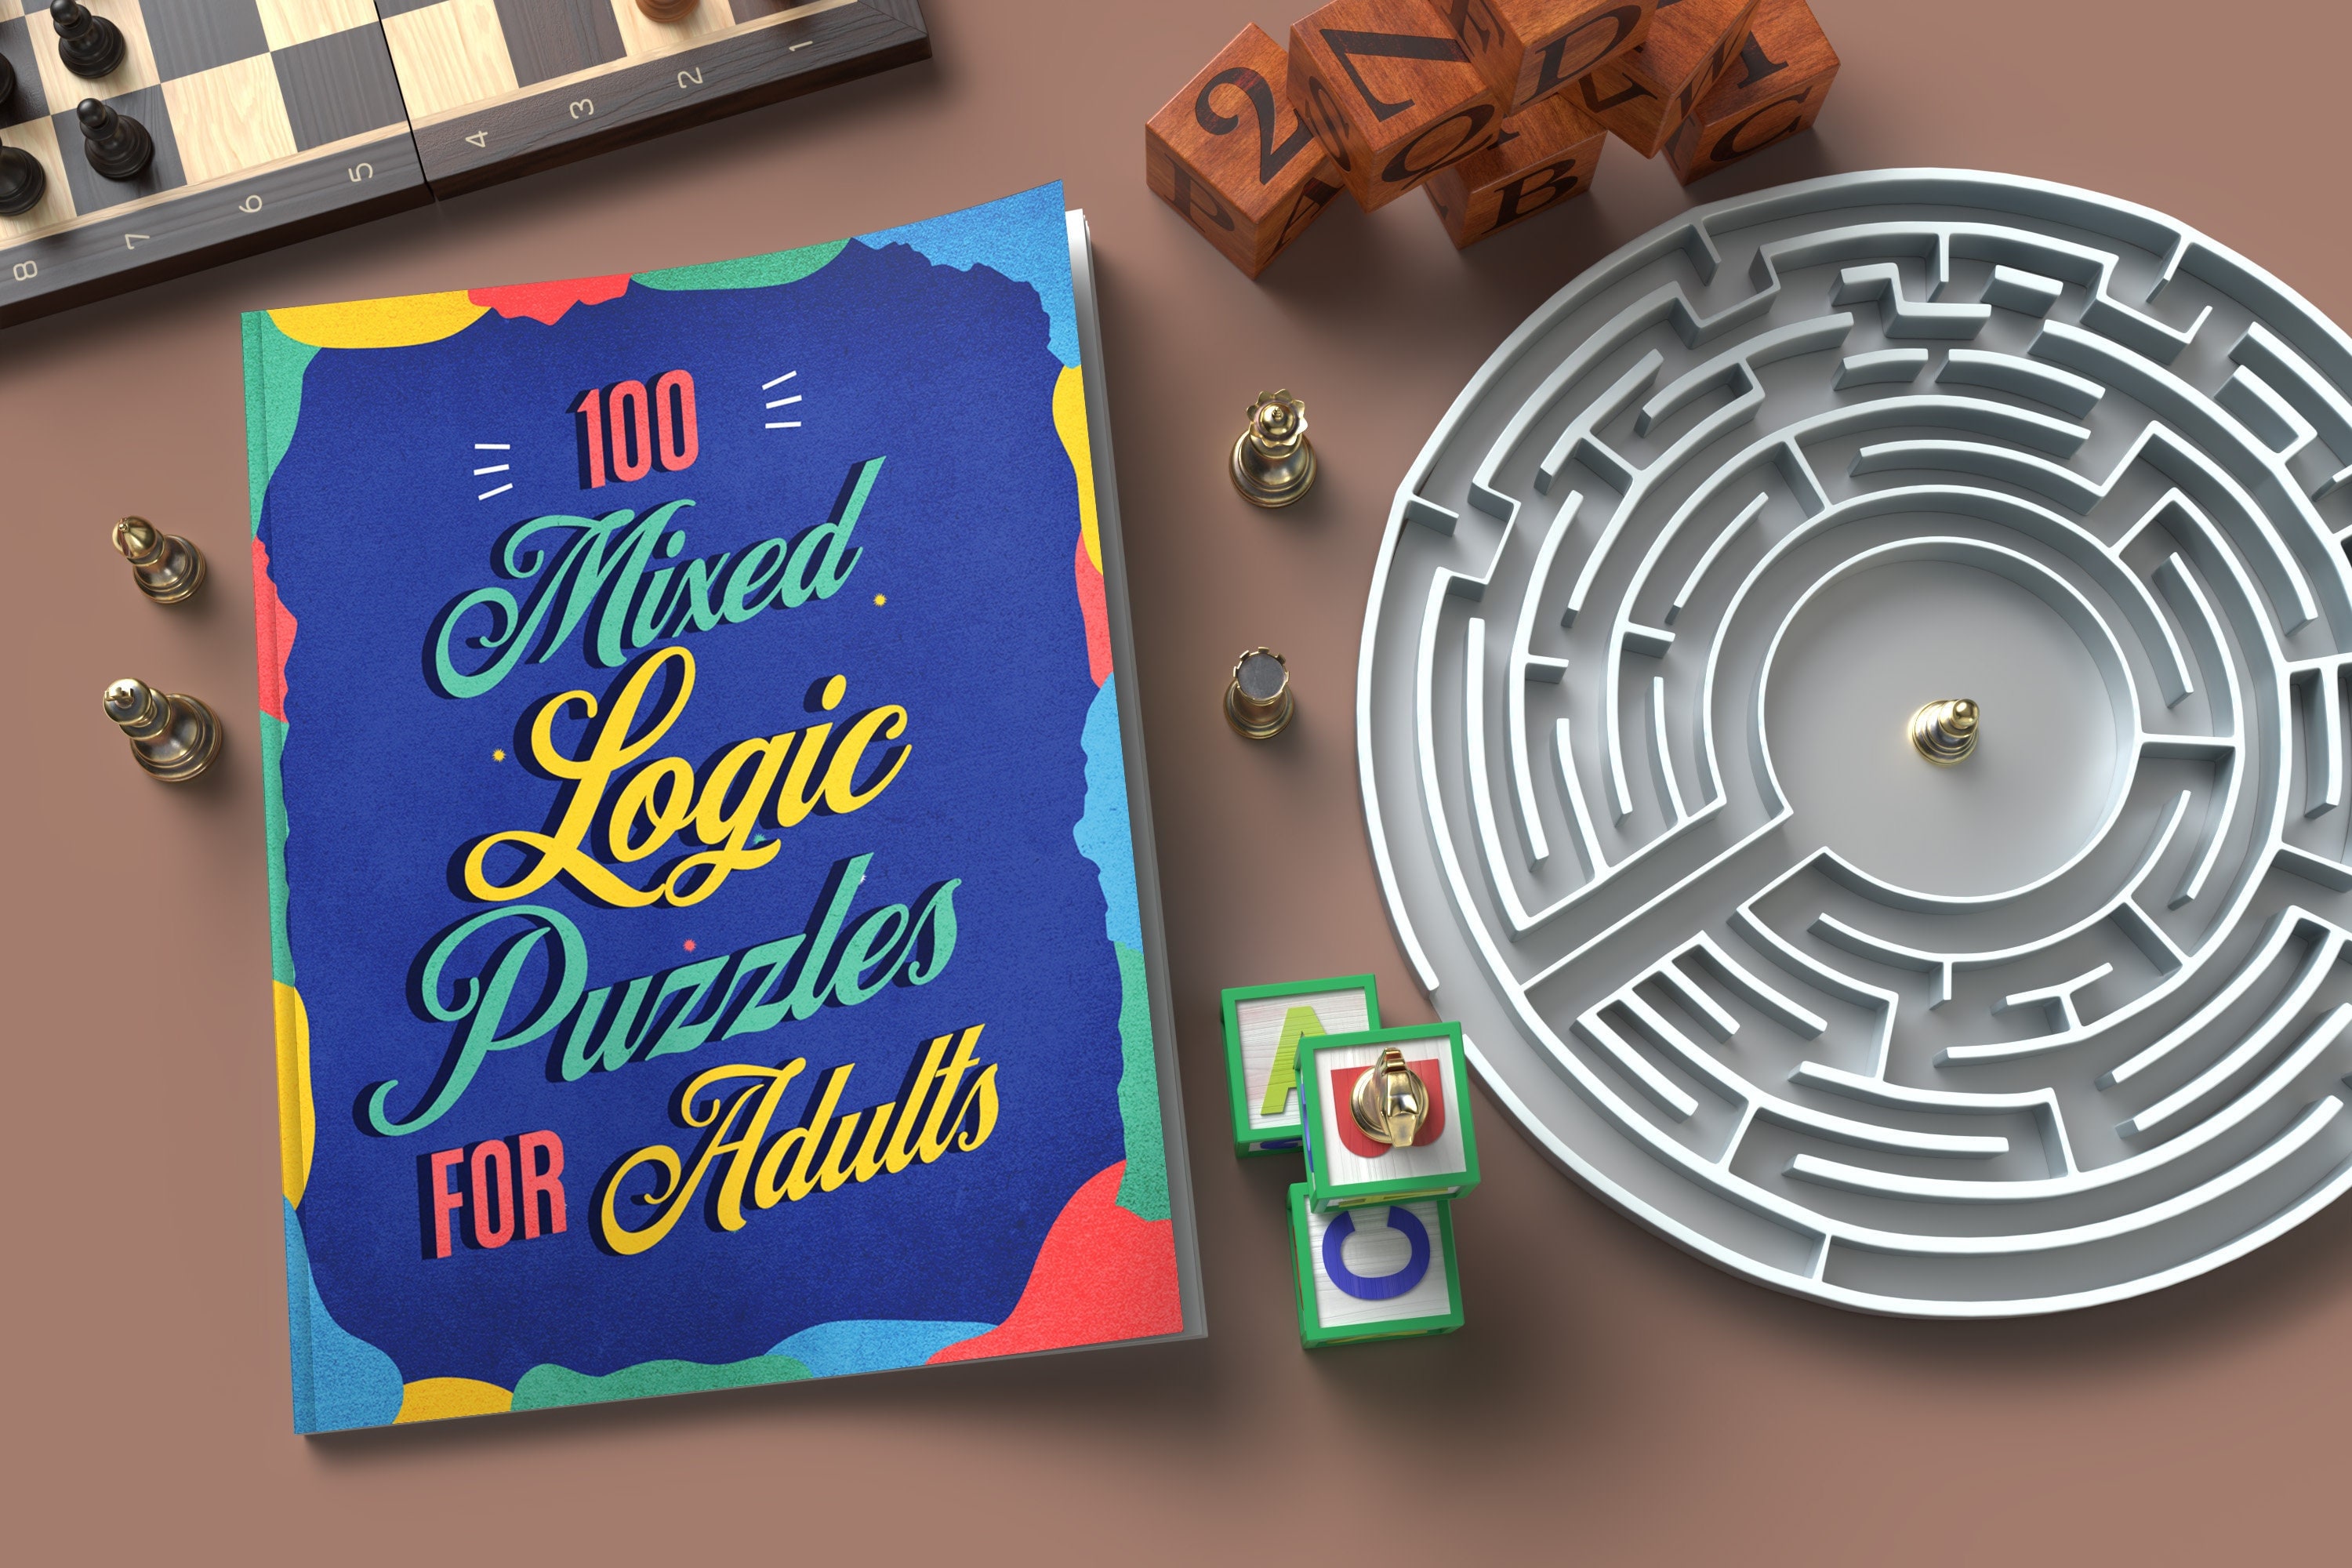 Buy 3D Puzzle Game Fort Knox Box Pro - $49.90. Best Wooden and Escape  puzzles from ESC WELT